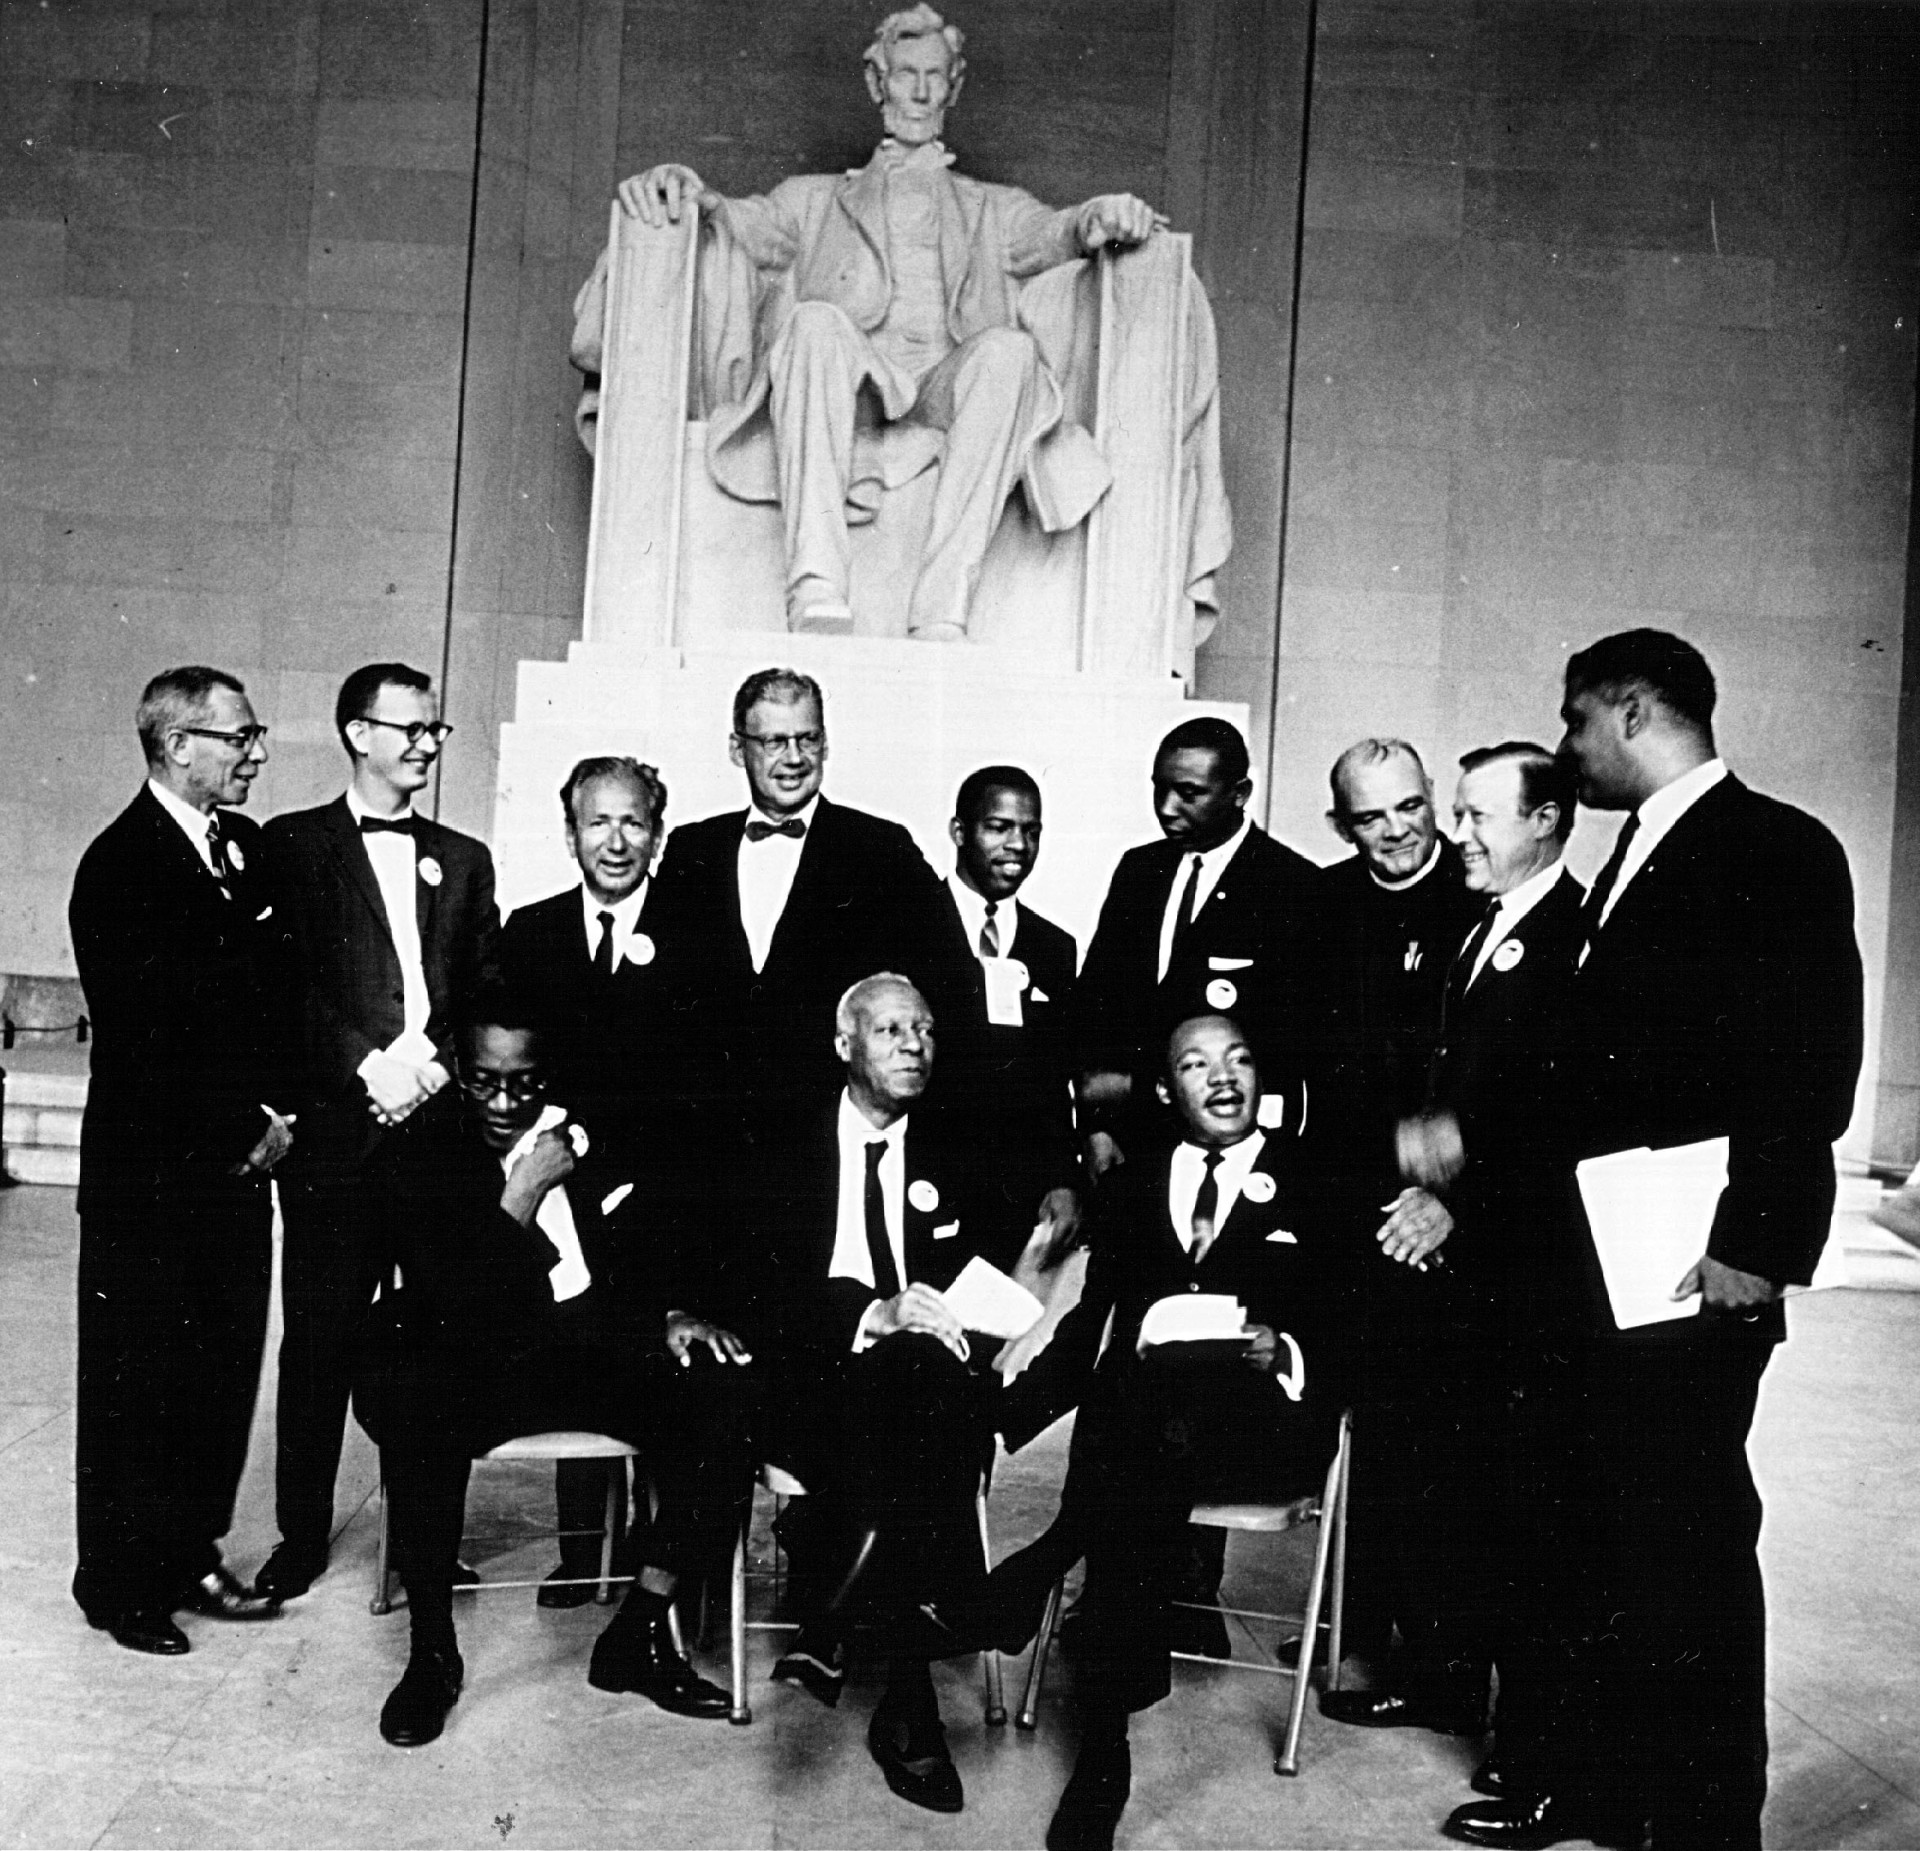 King and other civil rights leaders gathered at the Lincoln Memorial before the rally.<p><a href="https://www.msn.com/en-us/community/channel/vid-7xx8mnucu55yw63we9va2gwr7uihbxwc68fxqp25x6tg4ftibpra?cvid=94631541bc0f4f89bfd59158d696ad7e">Follow us and access great exclusive content every day</a></p>